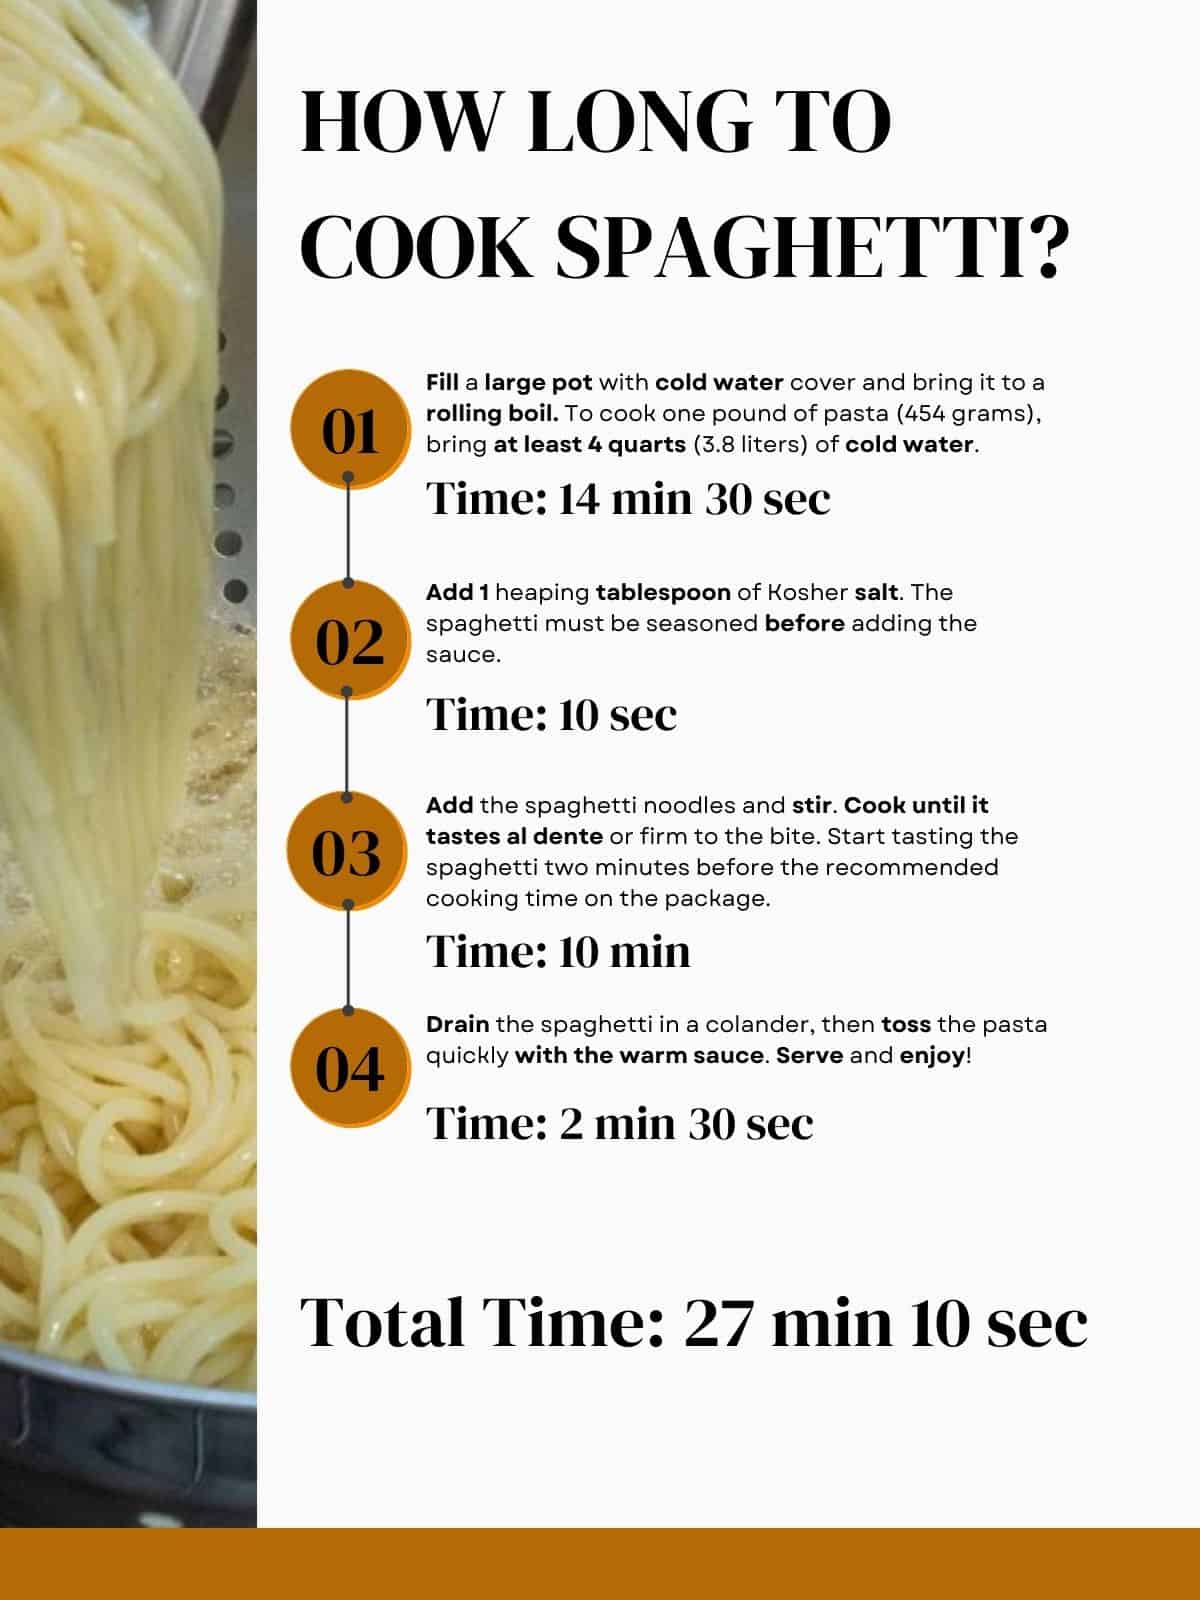 A Pinterest pin of how long it takes to cook spaghetti.